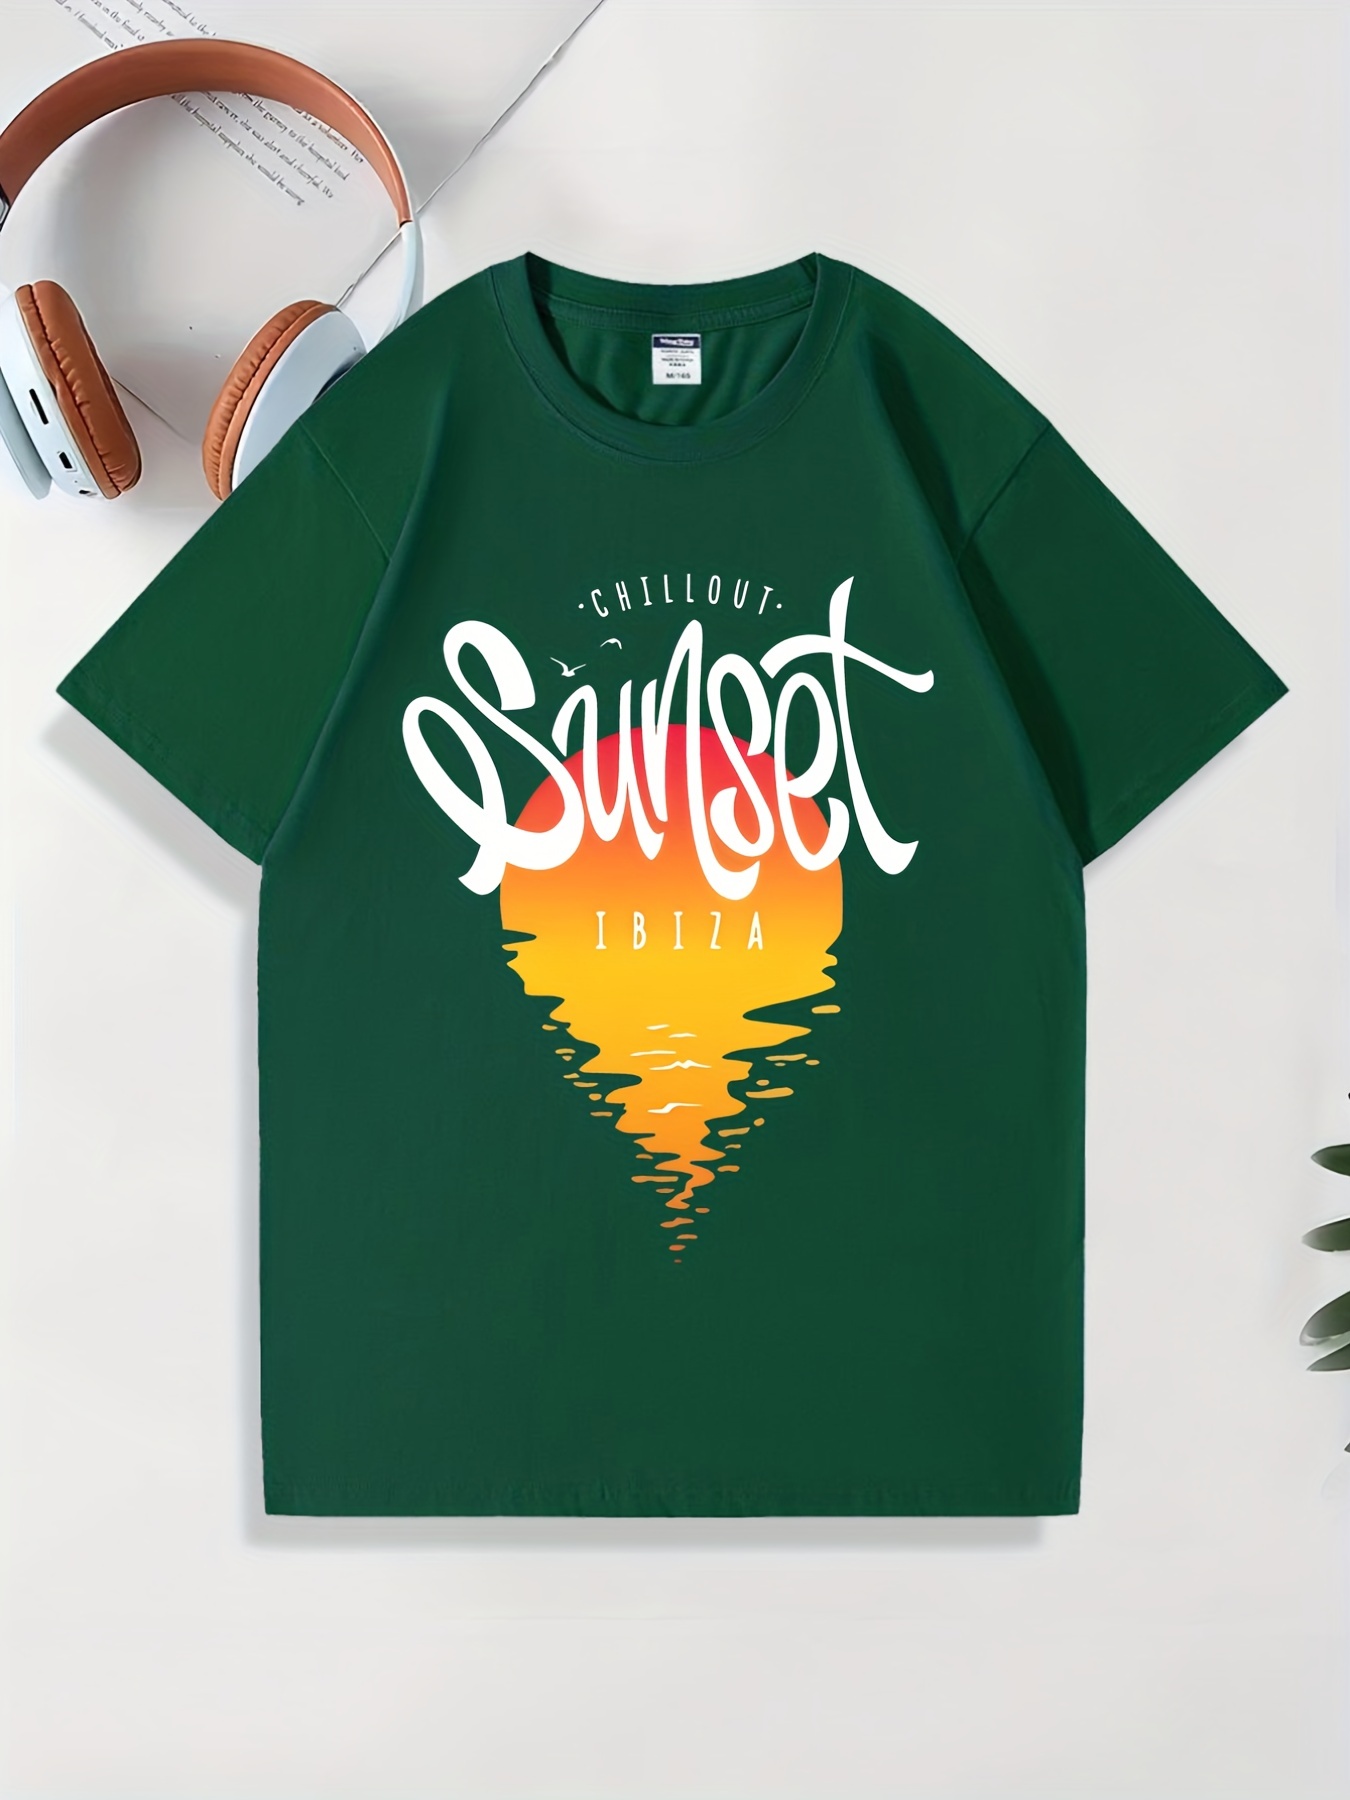 Chillout Sunset Print Mens Trendy Cotton T Shirt Casual Slightly